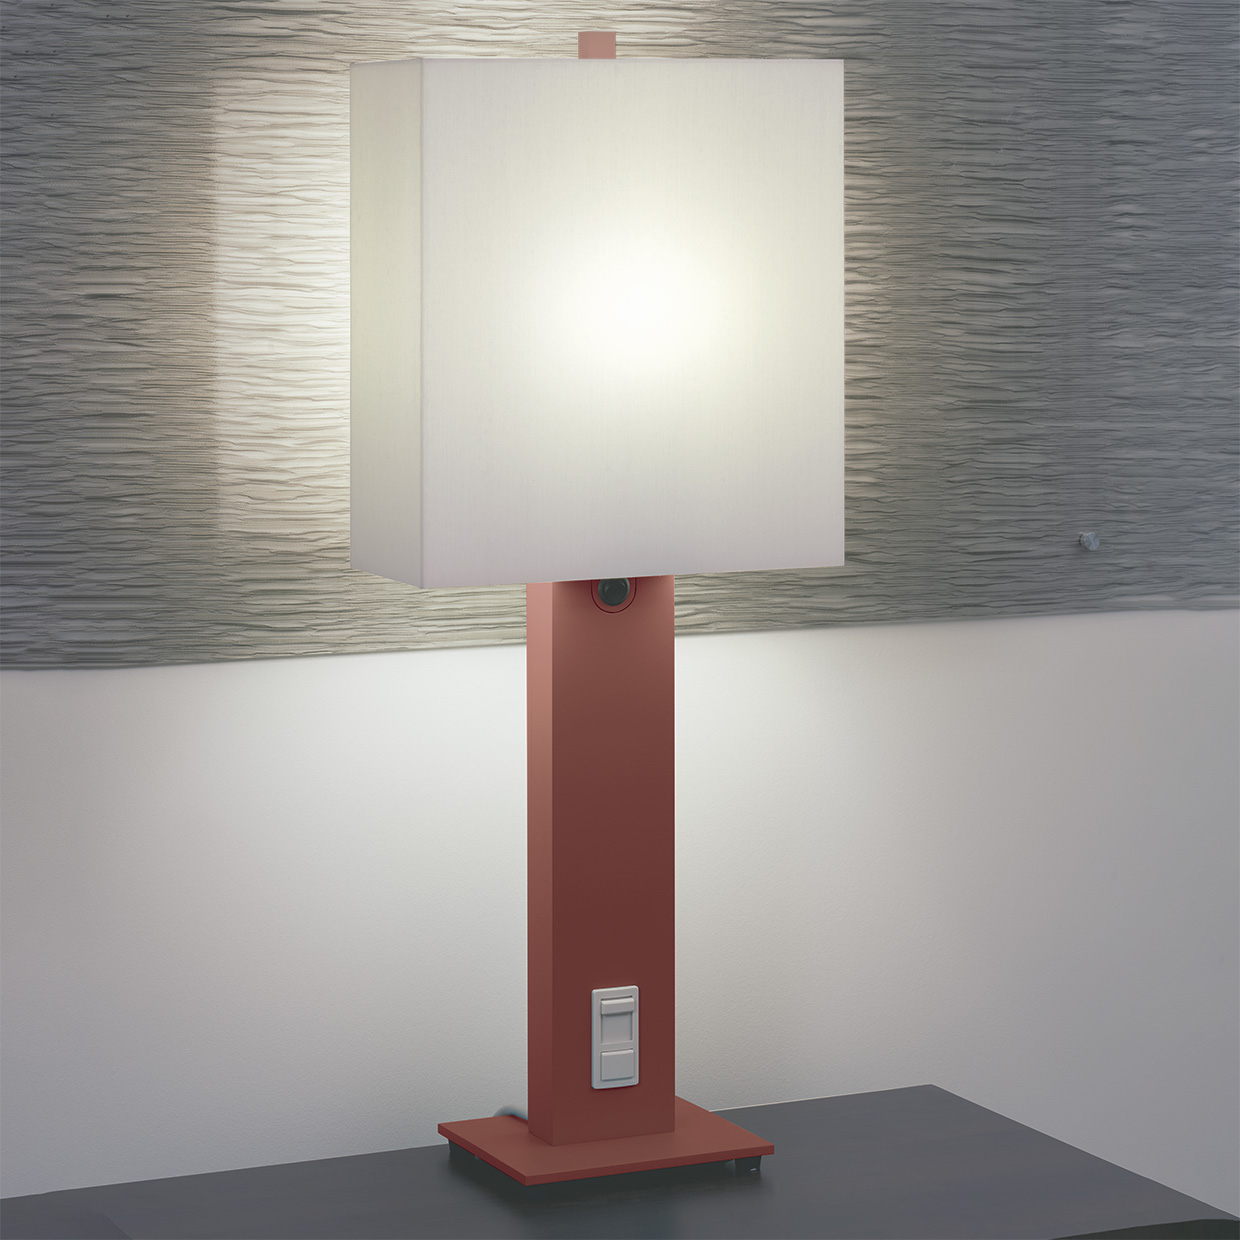 Serenity table lamp for healthcare with Vineyard Red paint